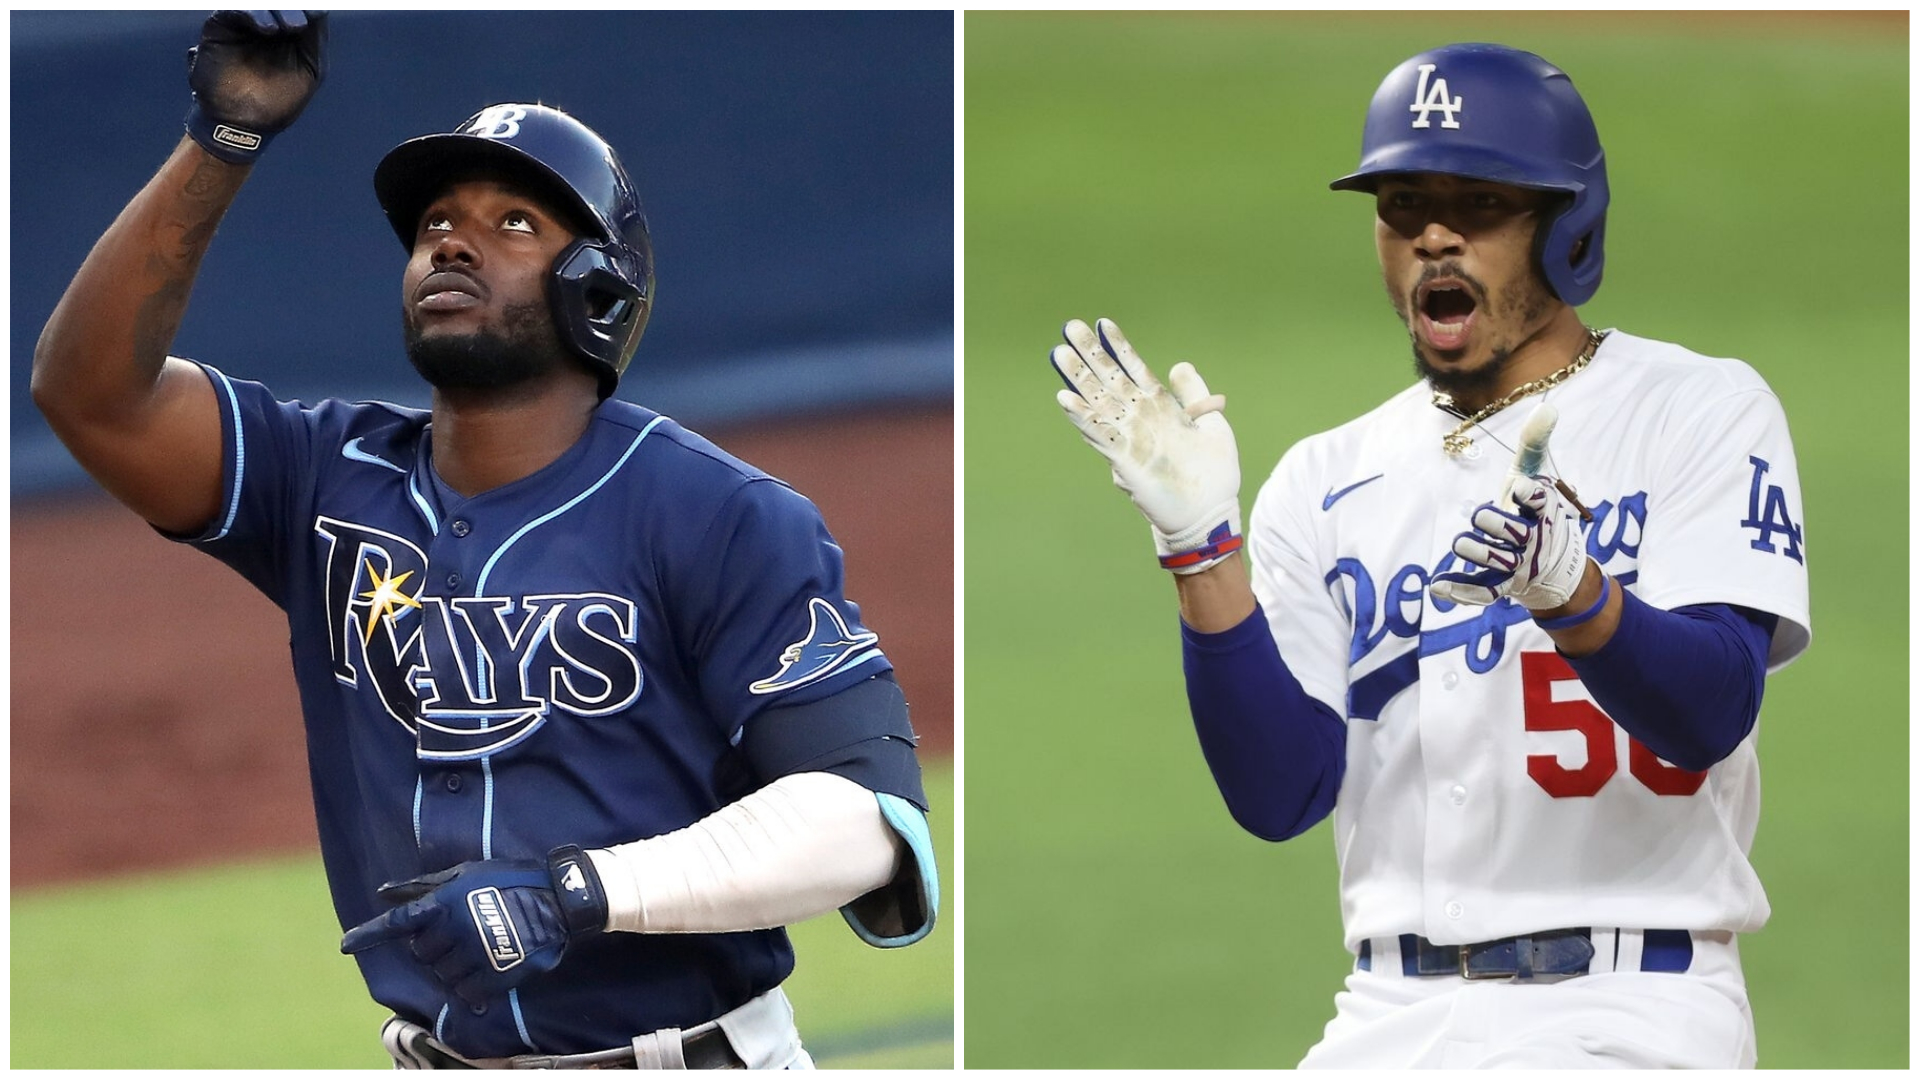 2020 World Series Odds Dodgers vs. Rays Betting Preview